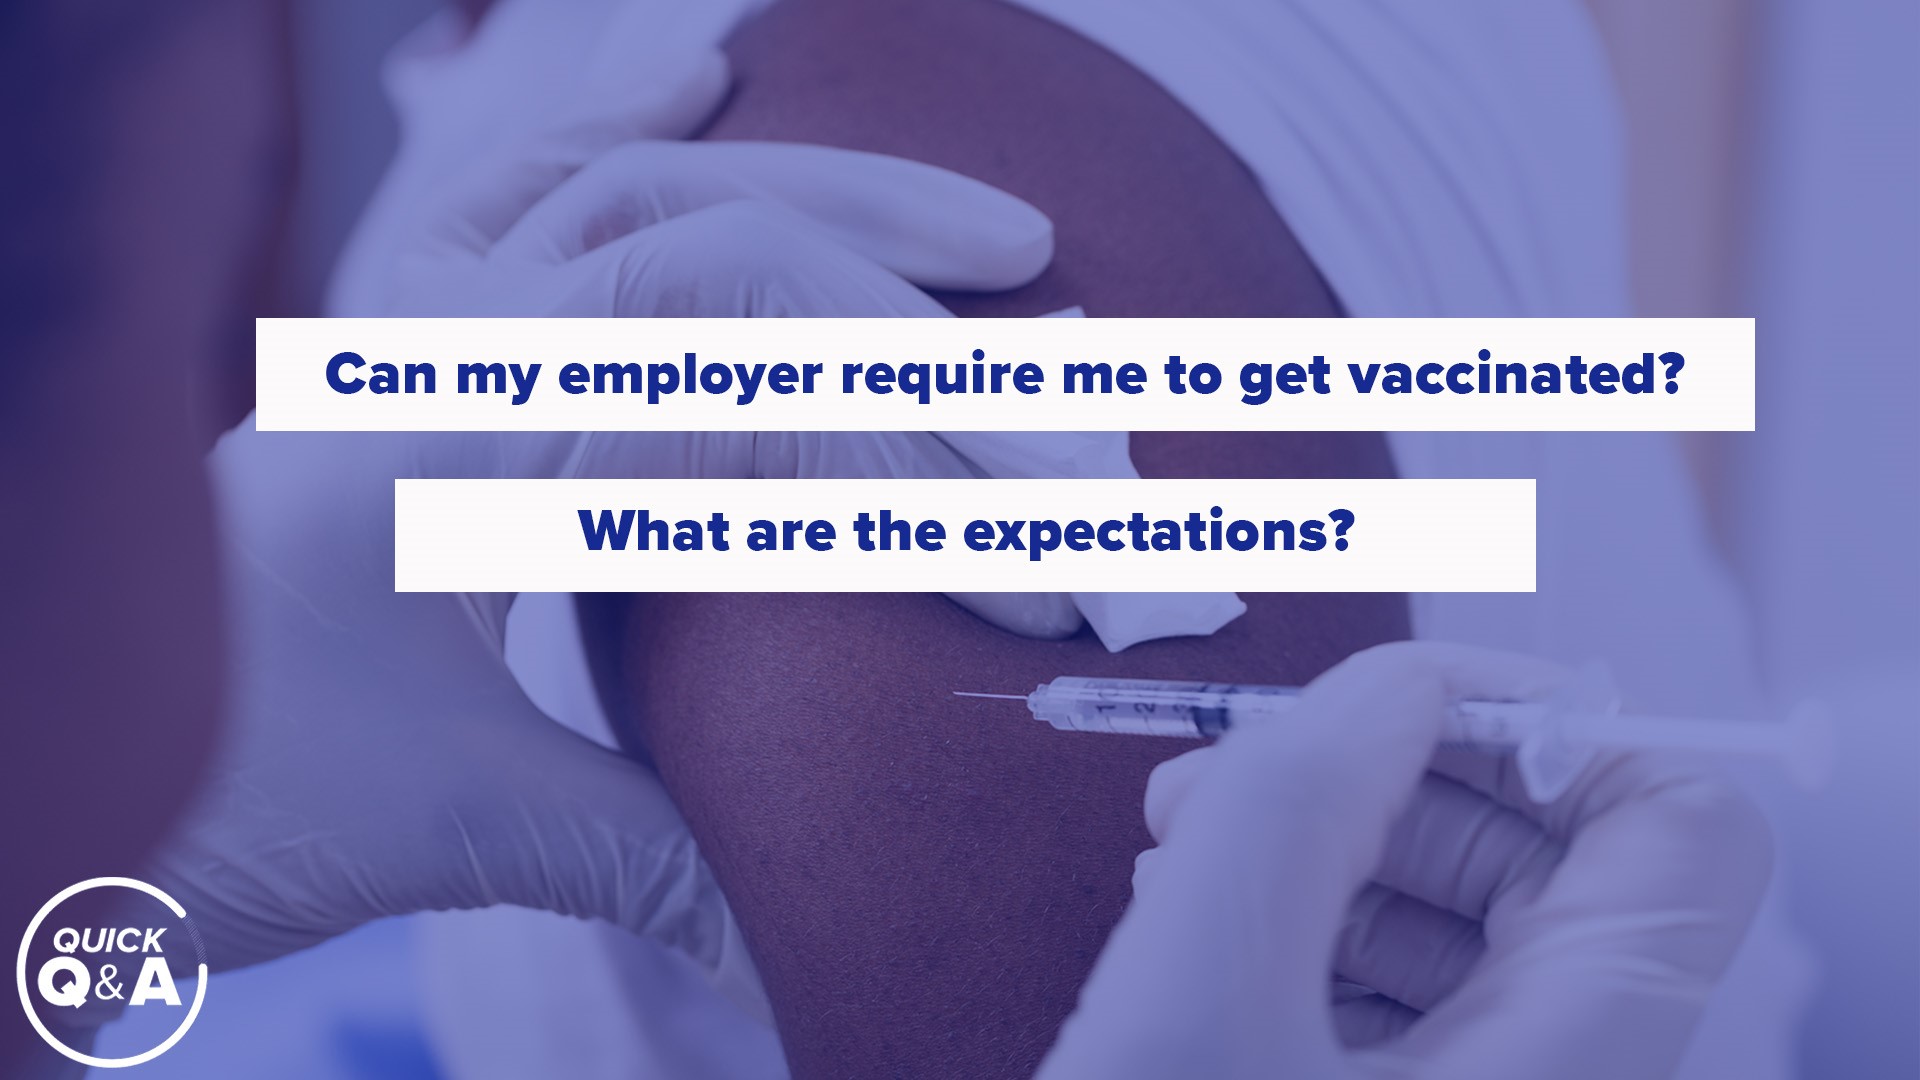 Employment Law Attorney Ryen Rasmus answers whether employers can require employees to receive COVID-19 vaccinations when available, how likely it is, and exceptions